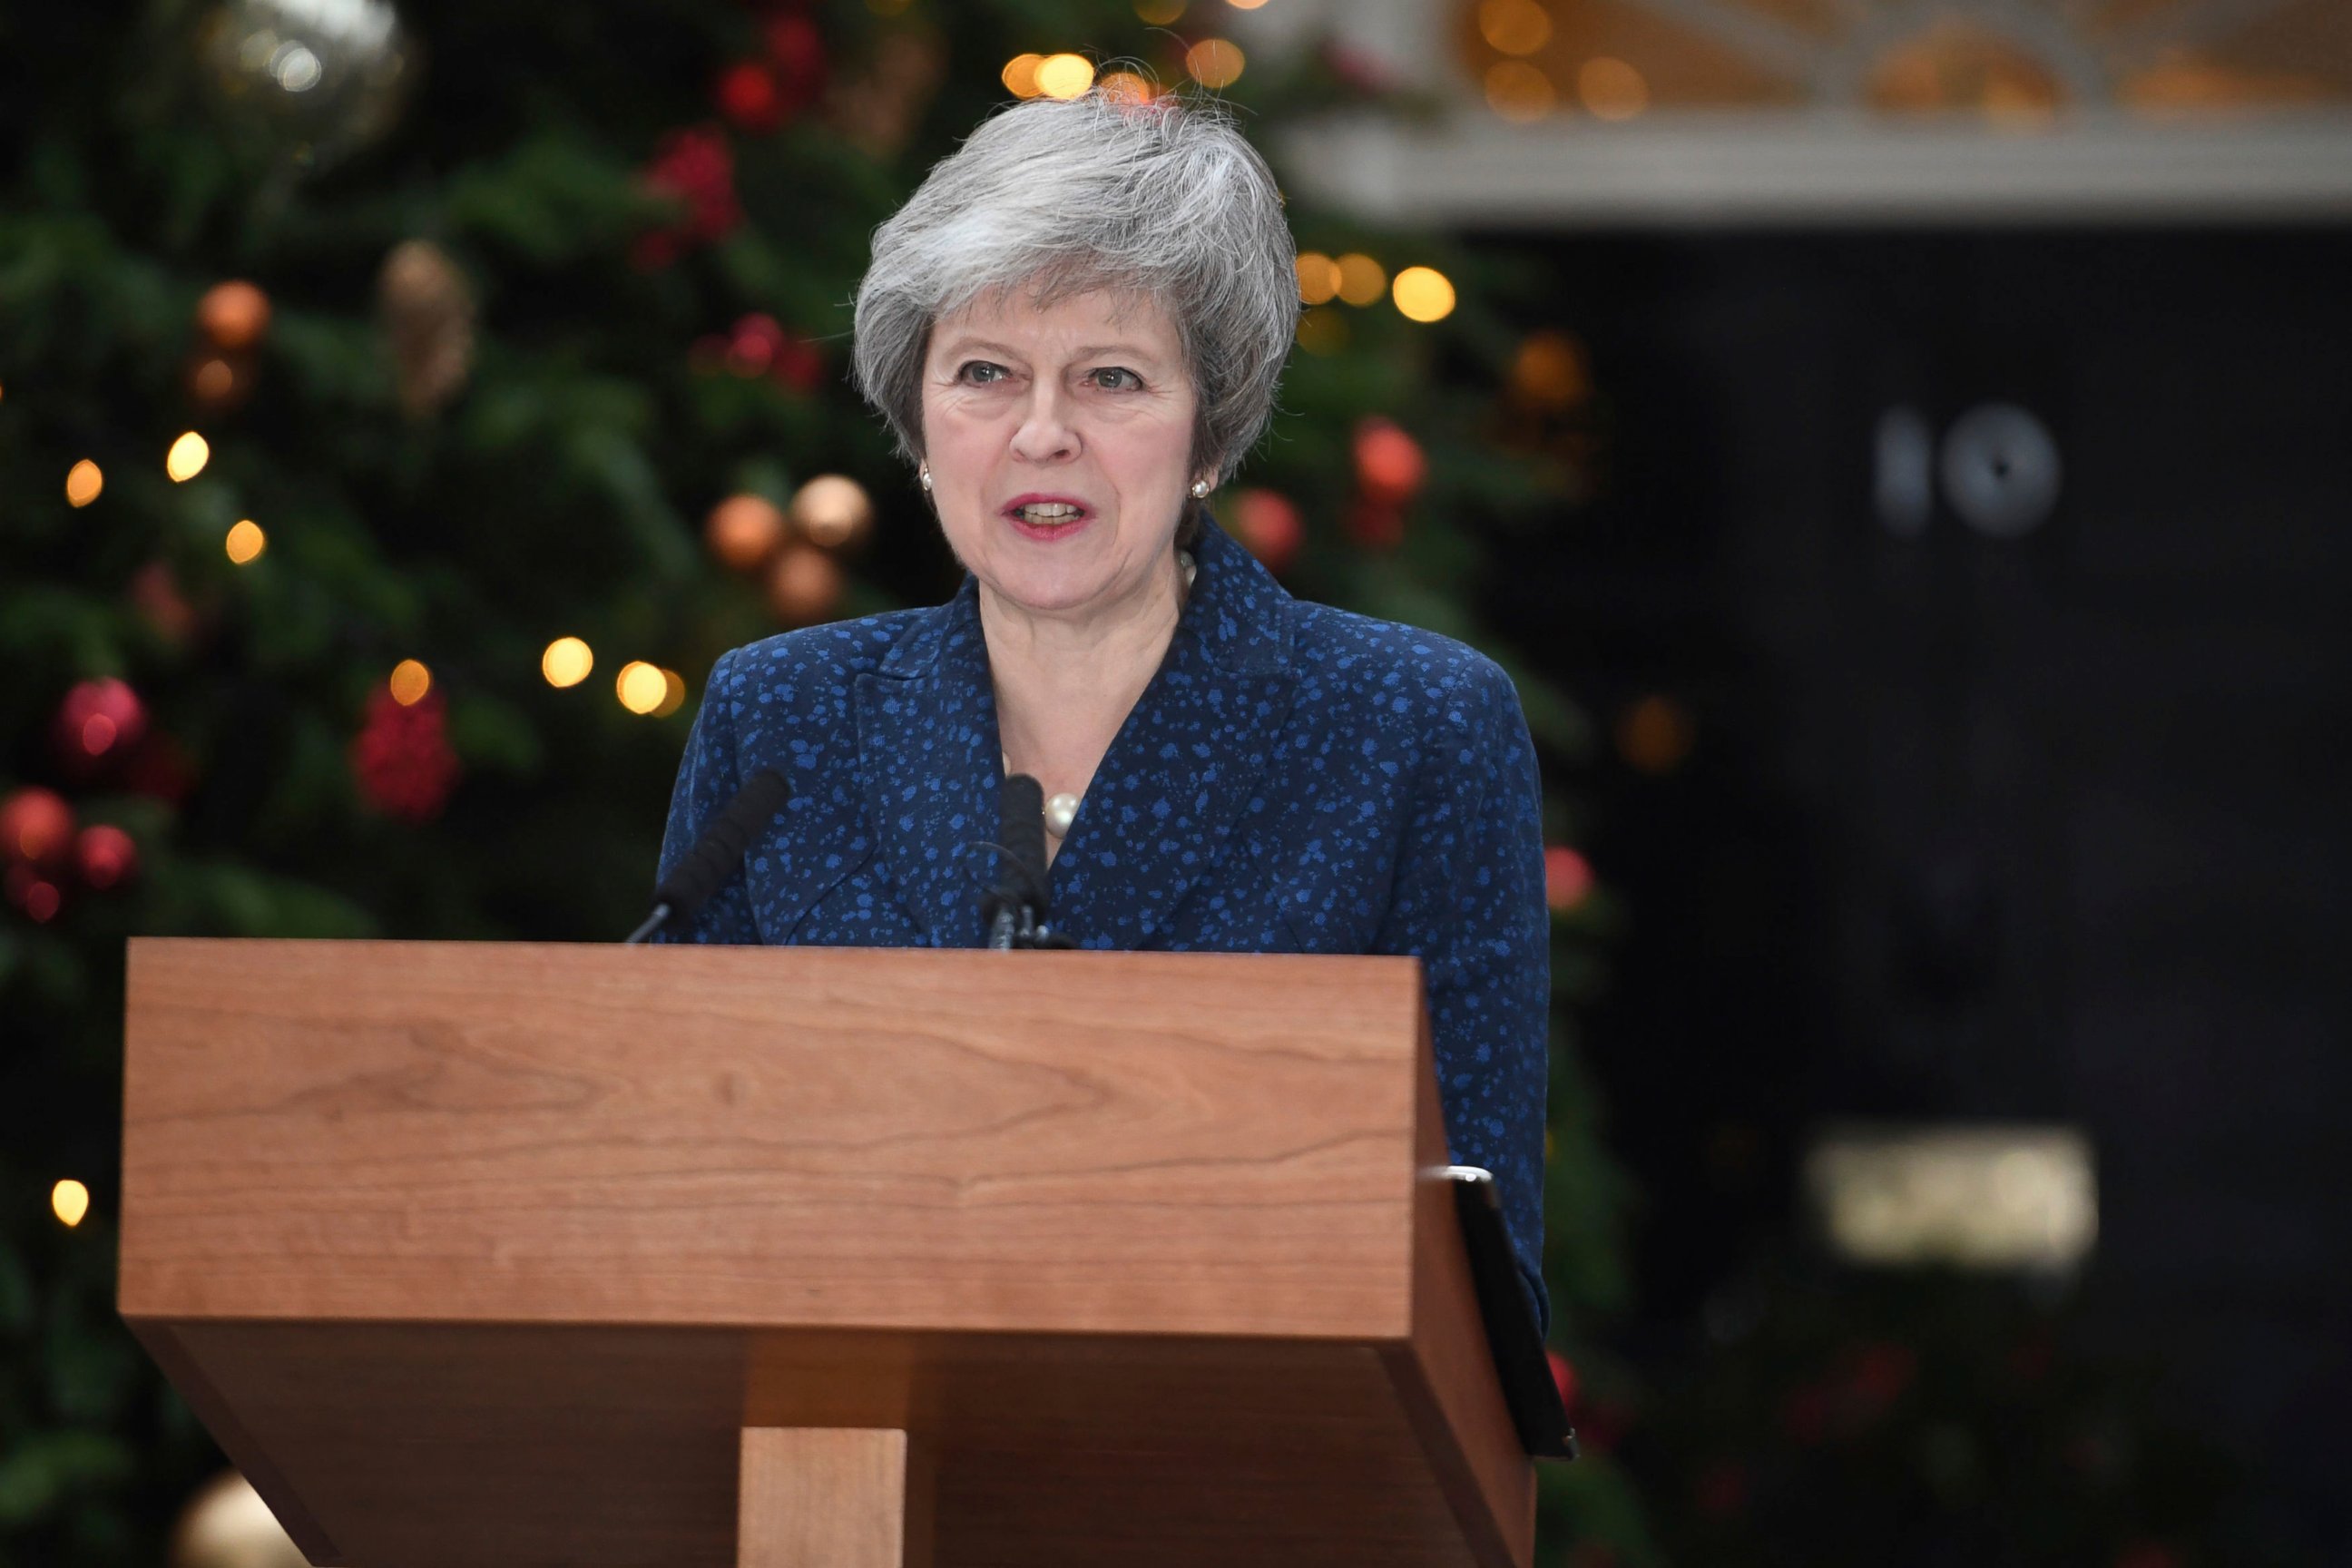 PHOTO: Britain's Prime Minister Theresa May makes a media statement in Downing Street, London, confirming there will be a vote of confidence in her leadership of the Conservative Party, Wednesday Dec. 12, 2018.